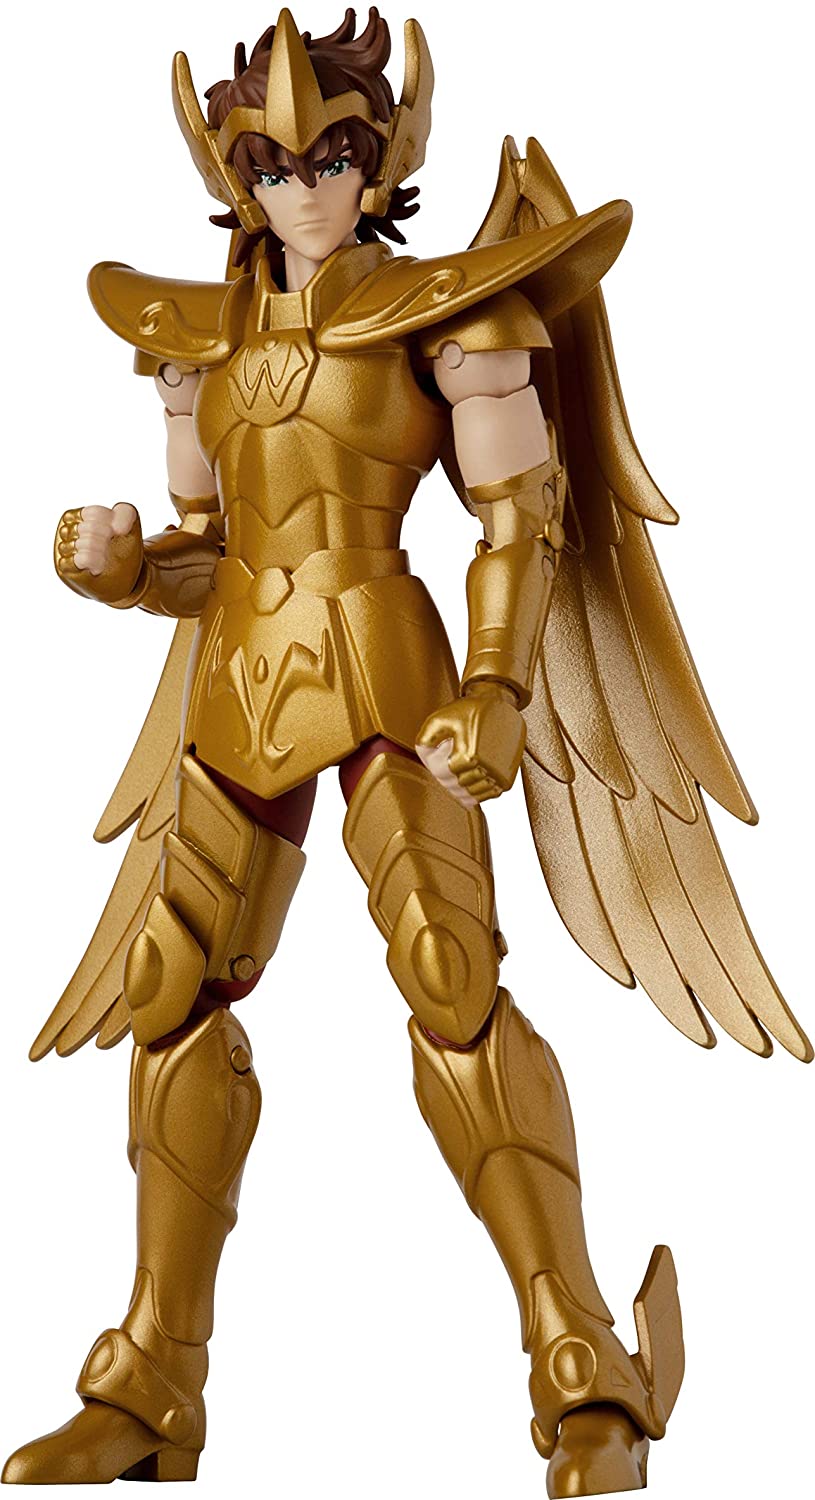 Anime Heroes KNIGHTS OF THE ZODIAC Sagittarius Aiolos Action Figure Super Anime Store